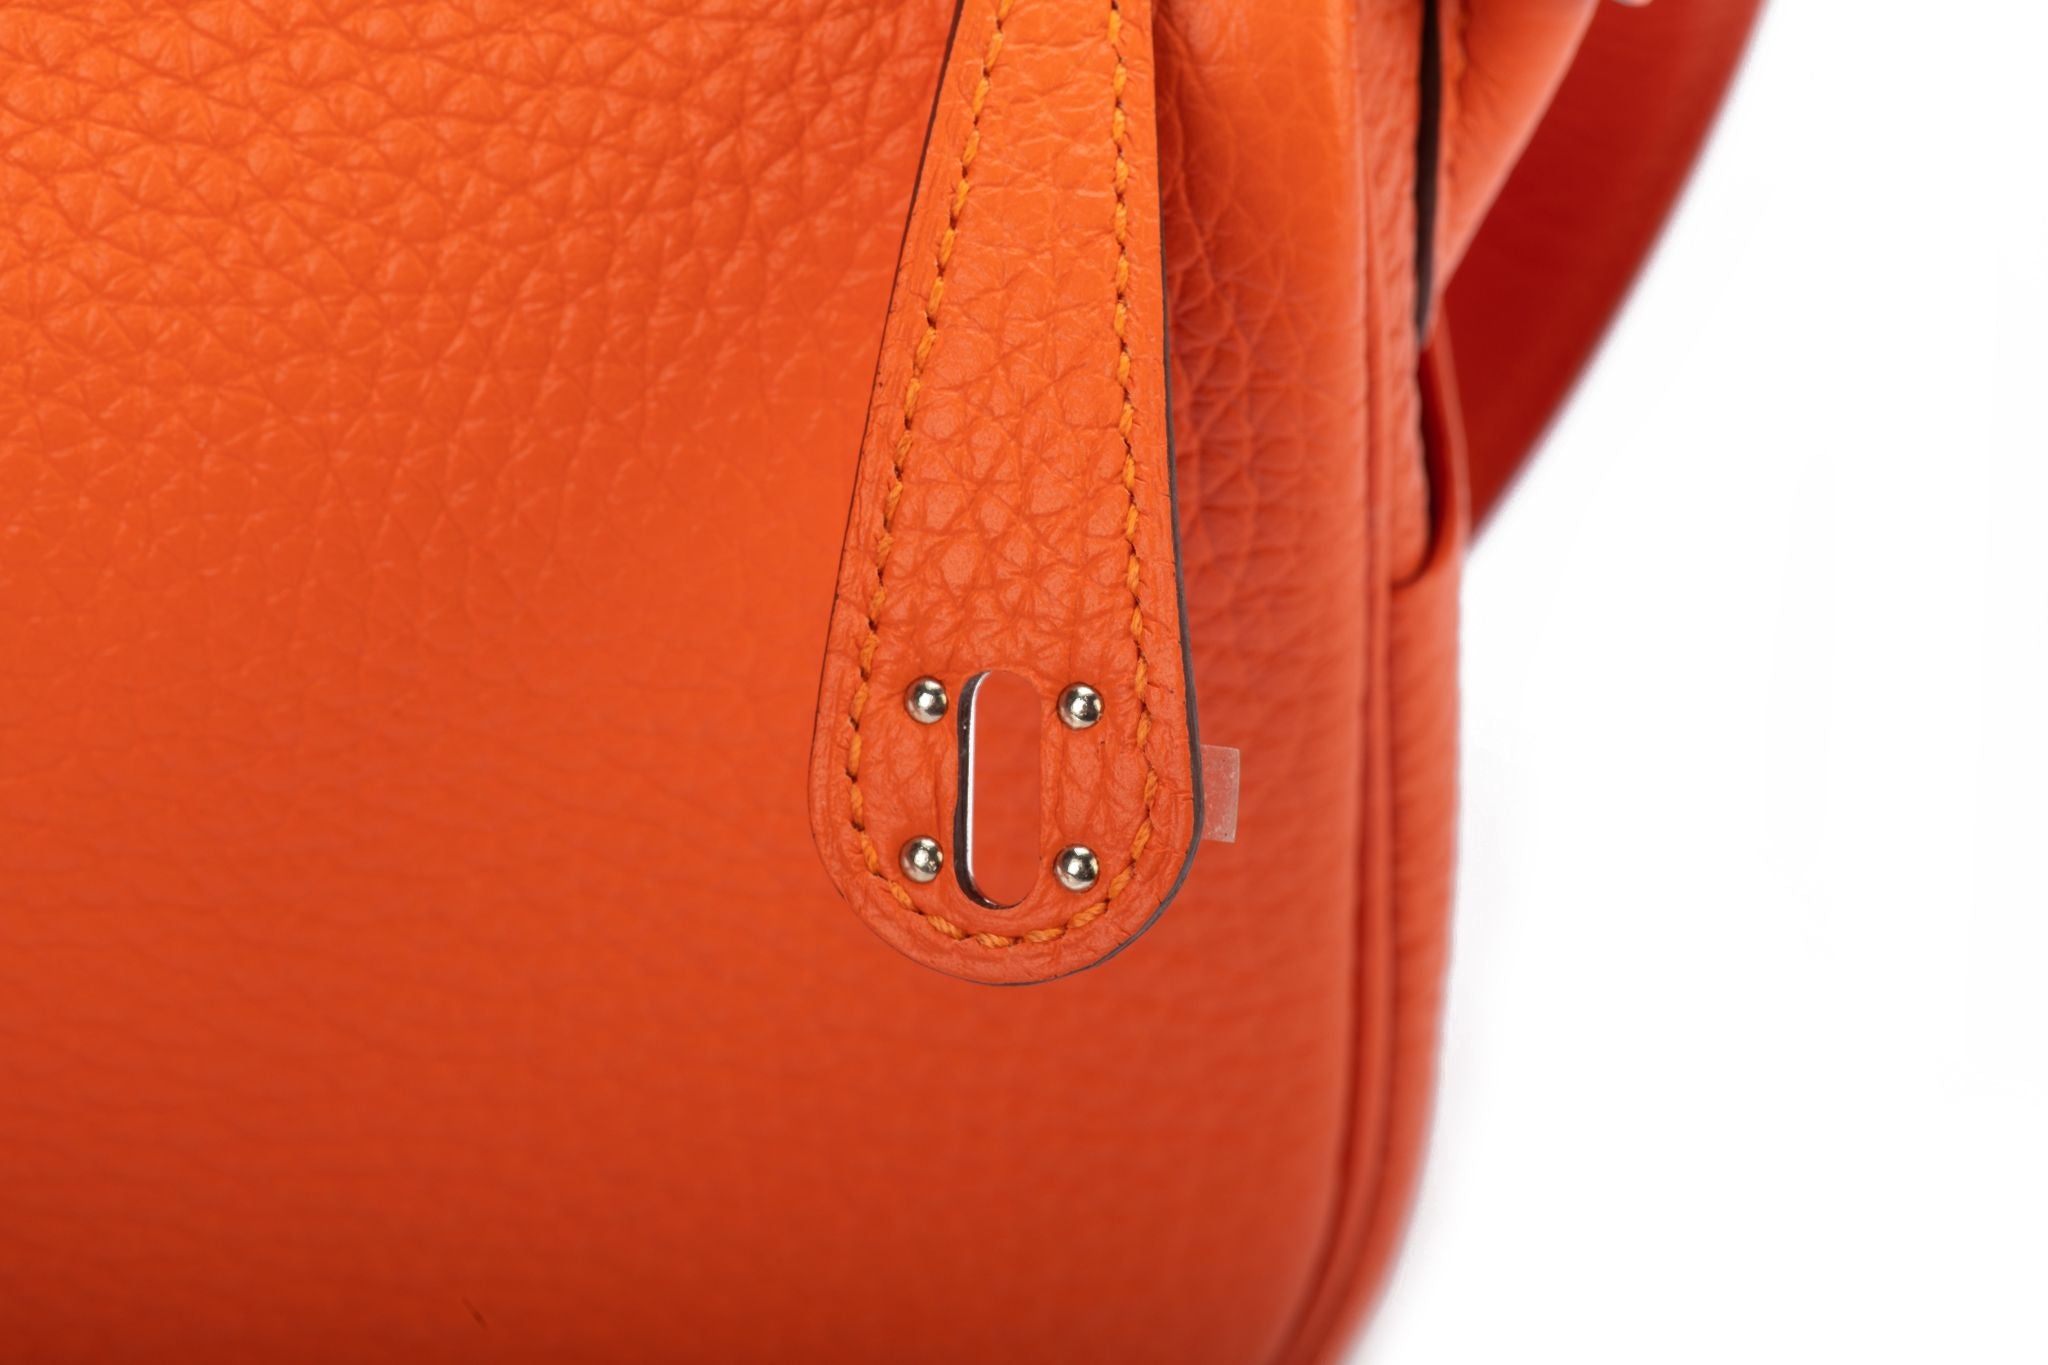 Hermes Lindy 30 Bag Coveted eToupe Clemence Palladium